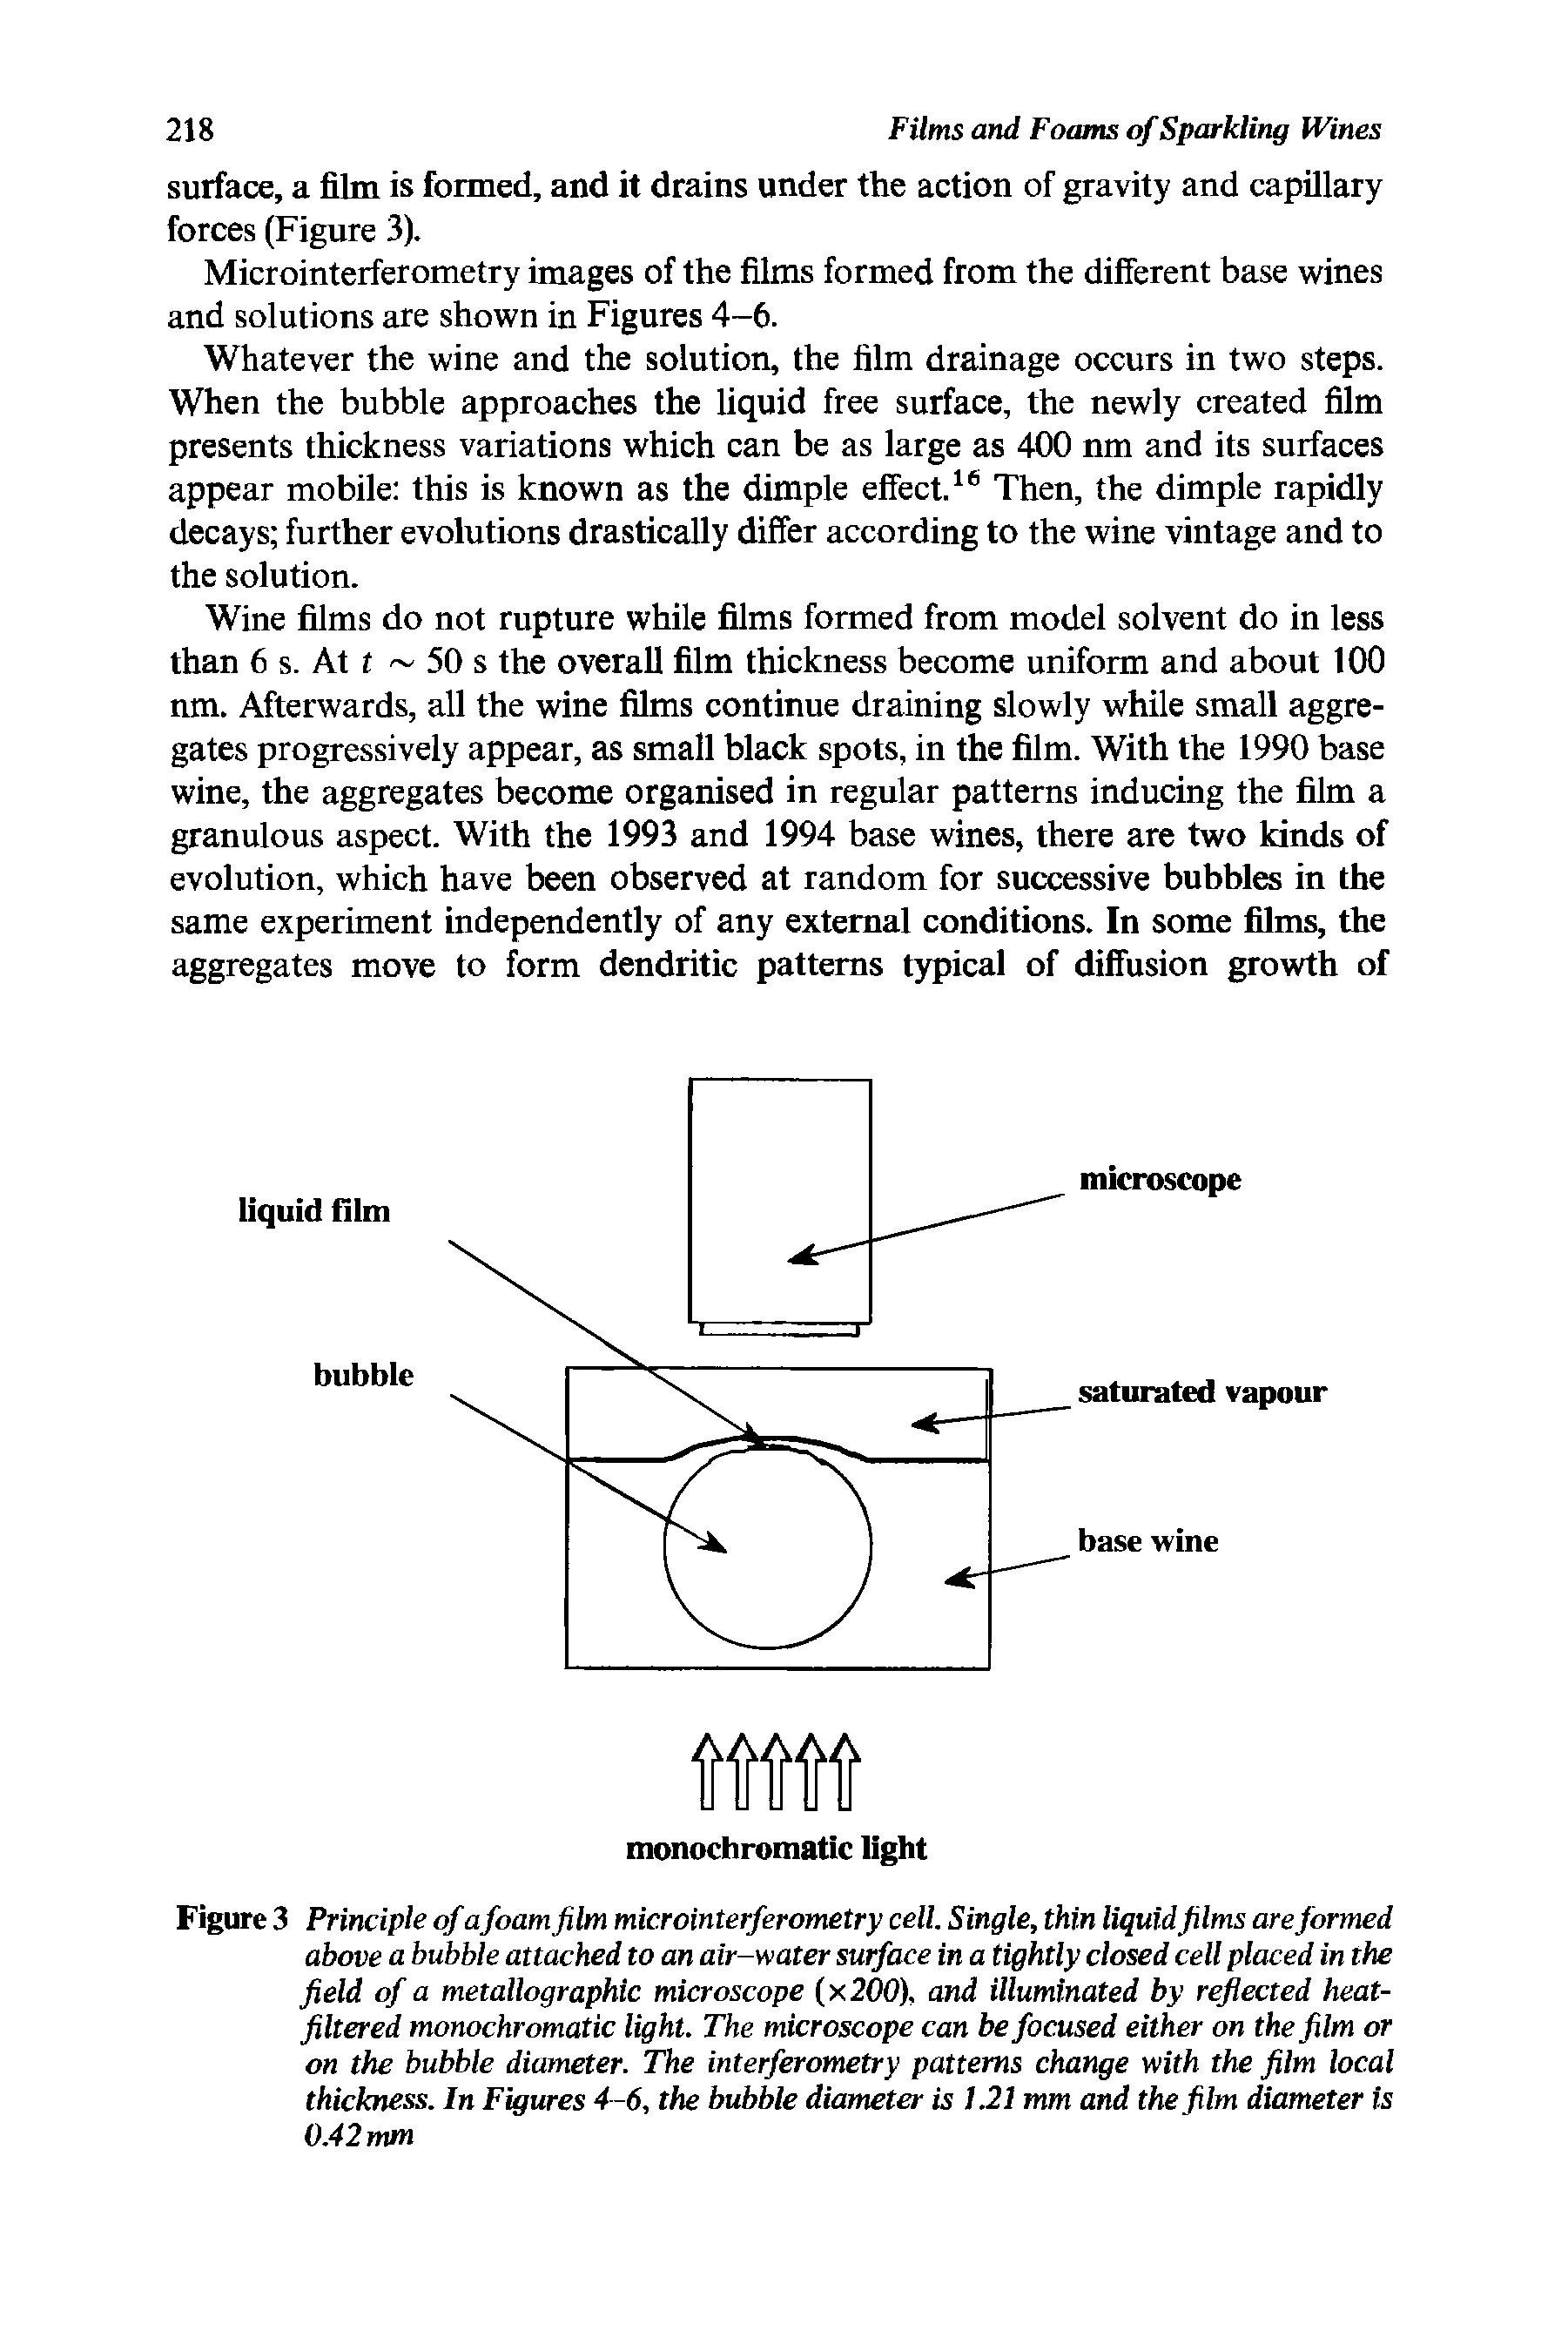 Figure 3 Principle of a foam film microinterferometry cell. Single, thin liquid films are formed above a bubble attached to an air-water surface in a tightly closed cell placed in the field of a metallographic microscope (x 200). and illuminated by reflected heat-filtered monochromatic light. The microscope can be focused either on the film or on the bubble diameter. The interferometry patterns change with the film local thickness. In Figures 4 -6, the bubble diameter is 1.21 mm and the film diameter is 0.42 mm...